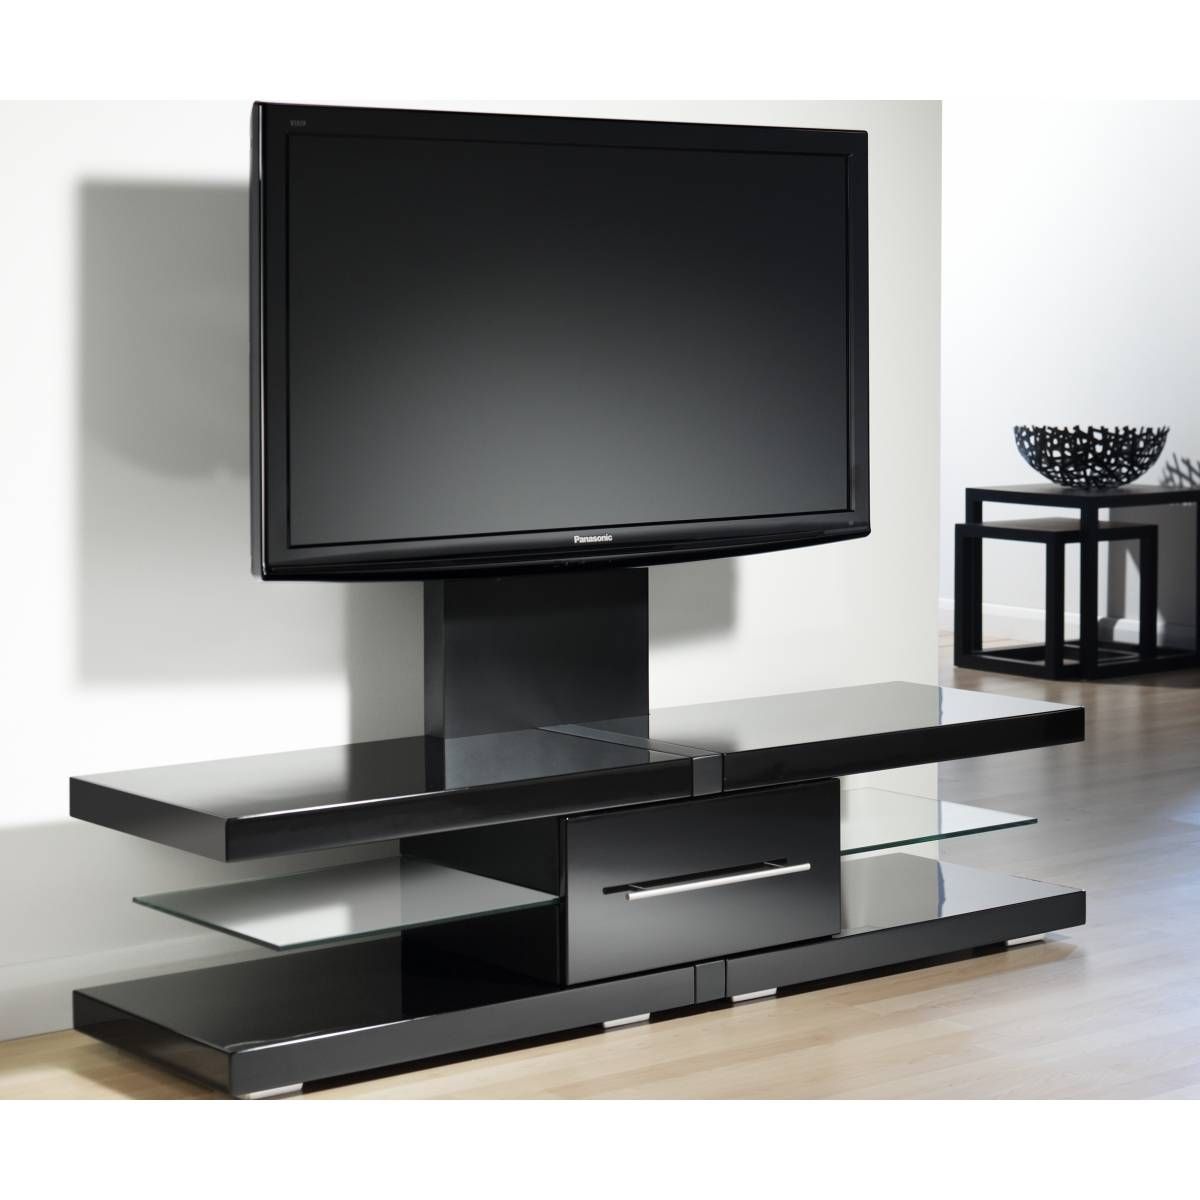 Modern Black Tone Wide Screen Tv Stand With Display Shelves And Pertaining To Modern Tv Stands For 60 Inch Tvs (View 1 of 15)